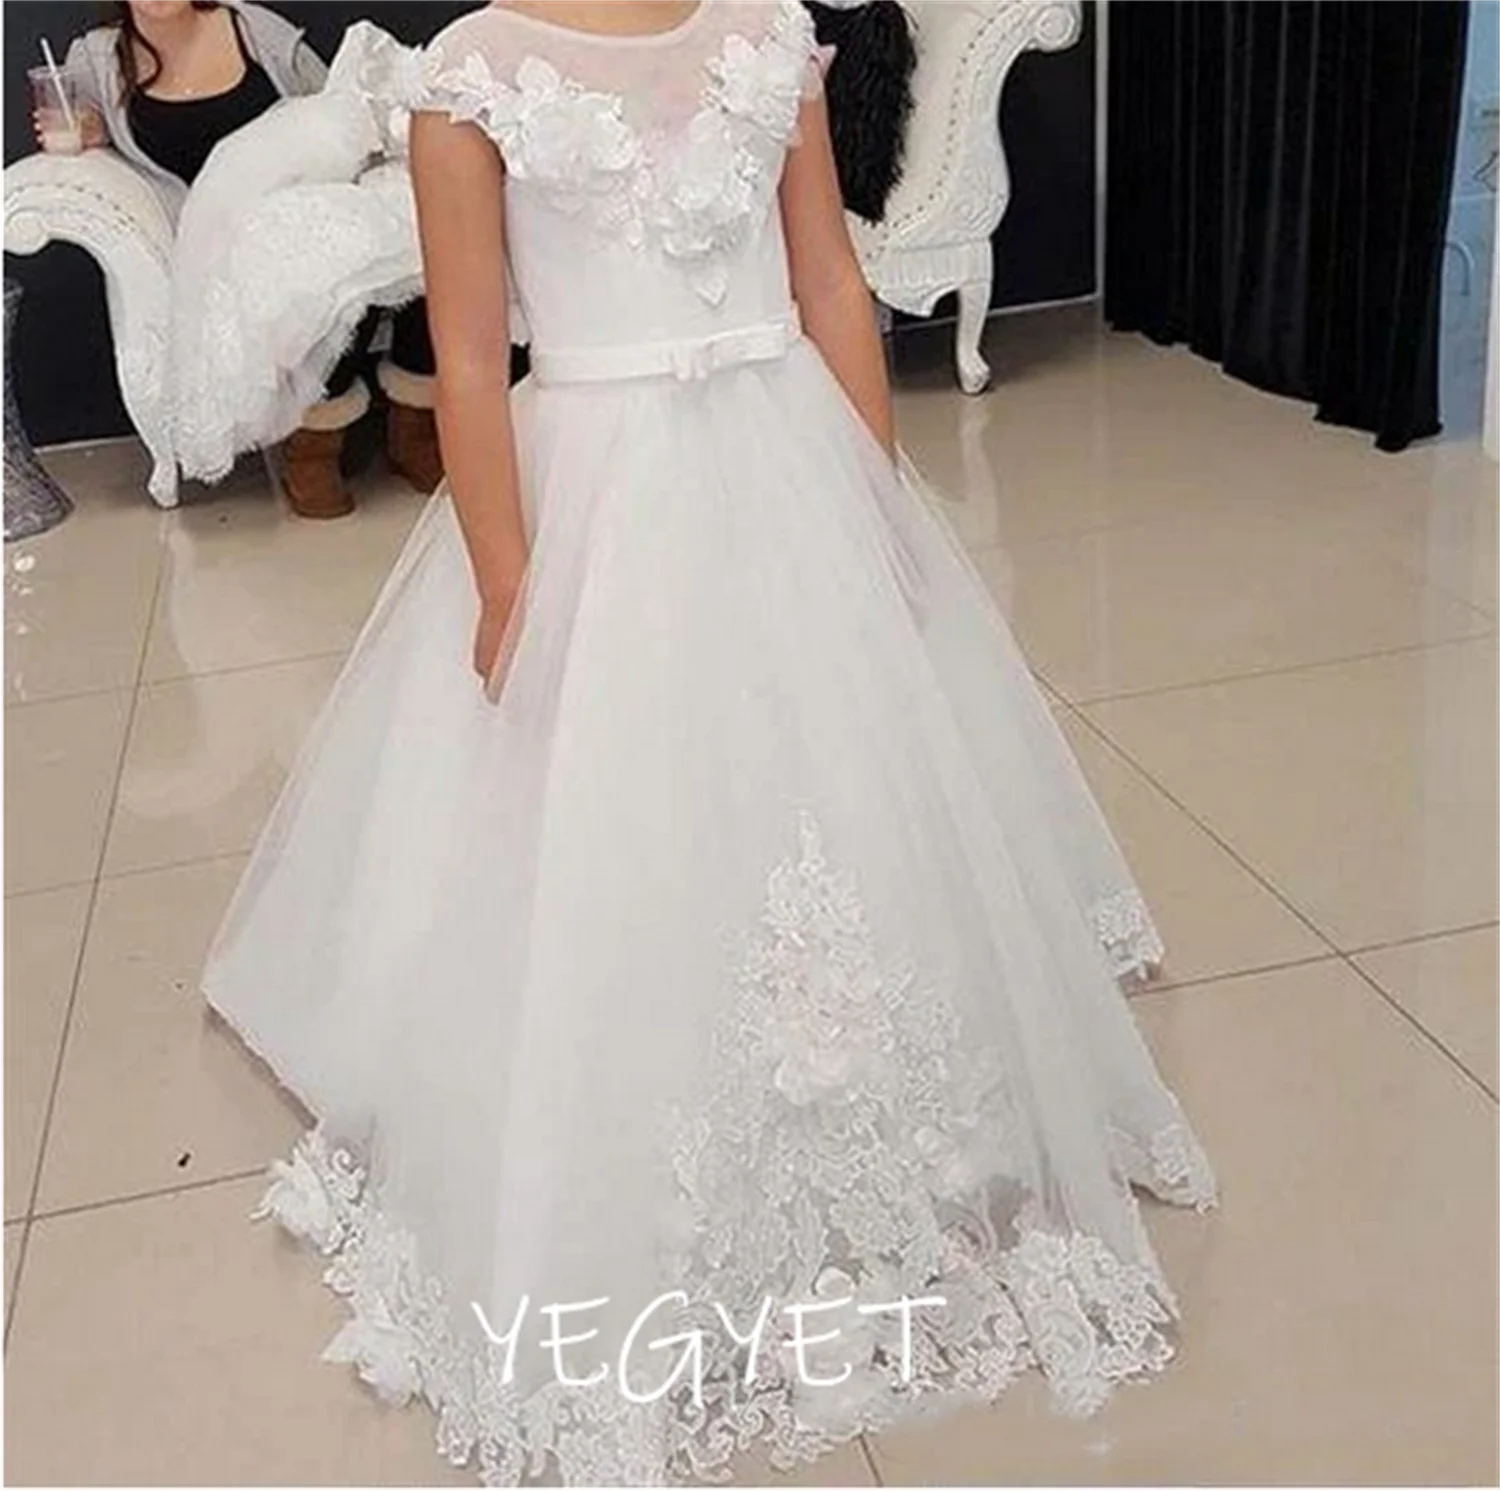 

Stunning Ivory White Flower Girls Dresses Appliques Lace Princess First Communion Dresses Birthday Party Gown